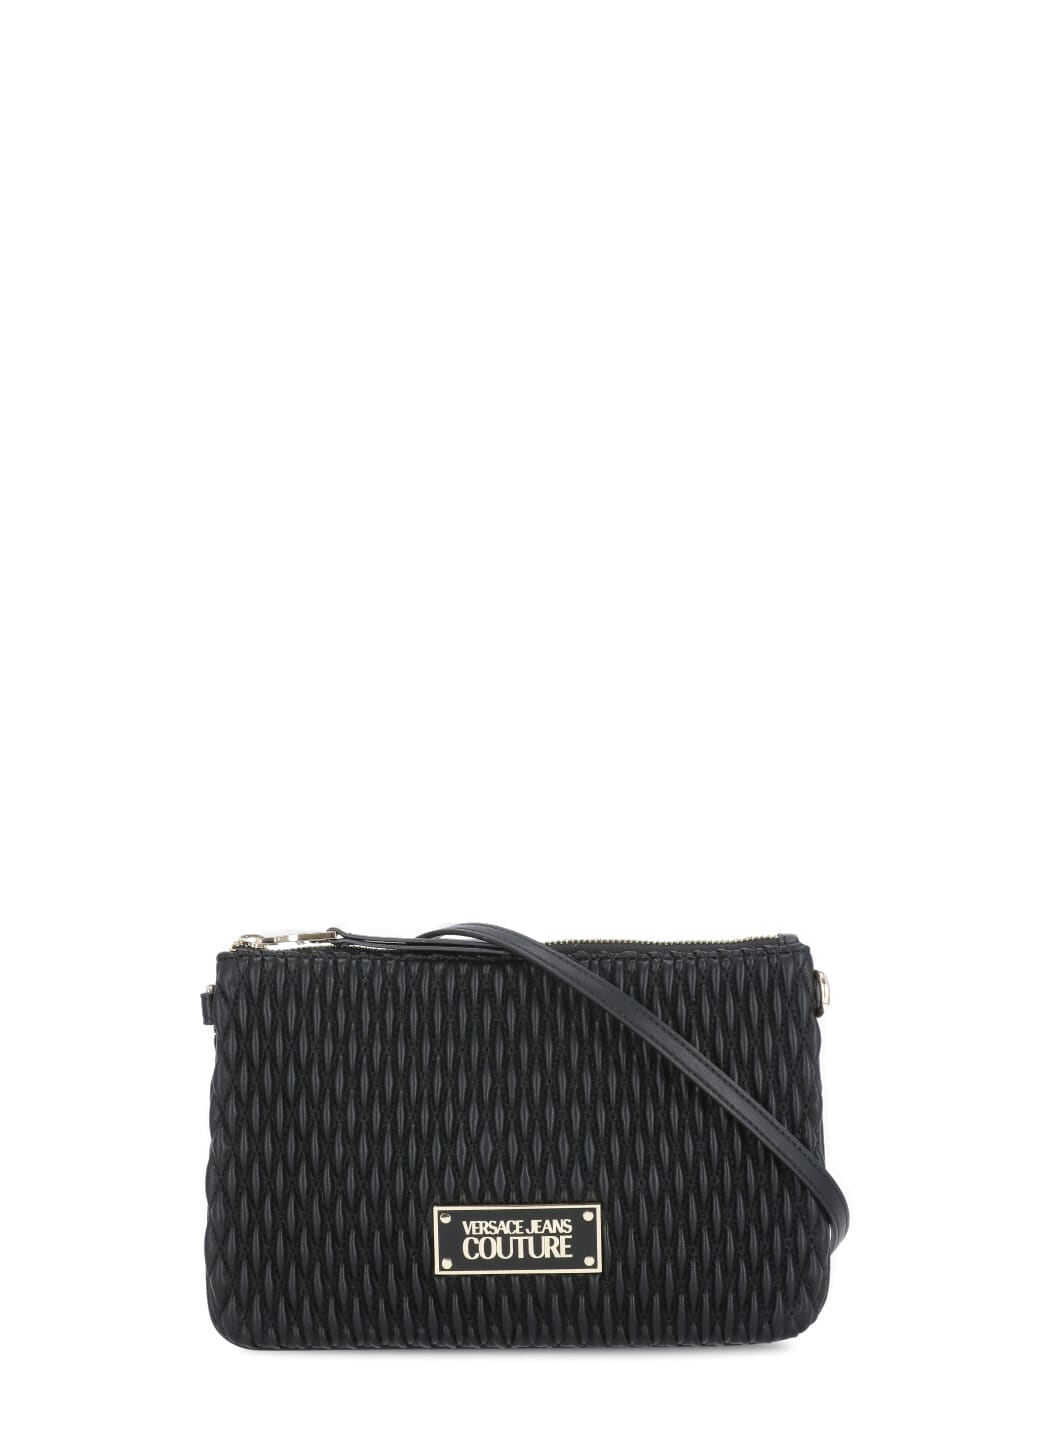 Versace Jeans Couture Pochette With Logo In Black